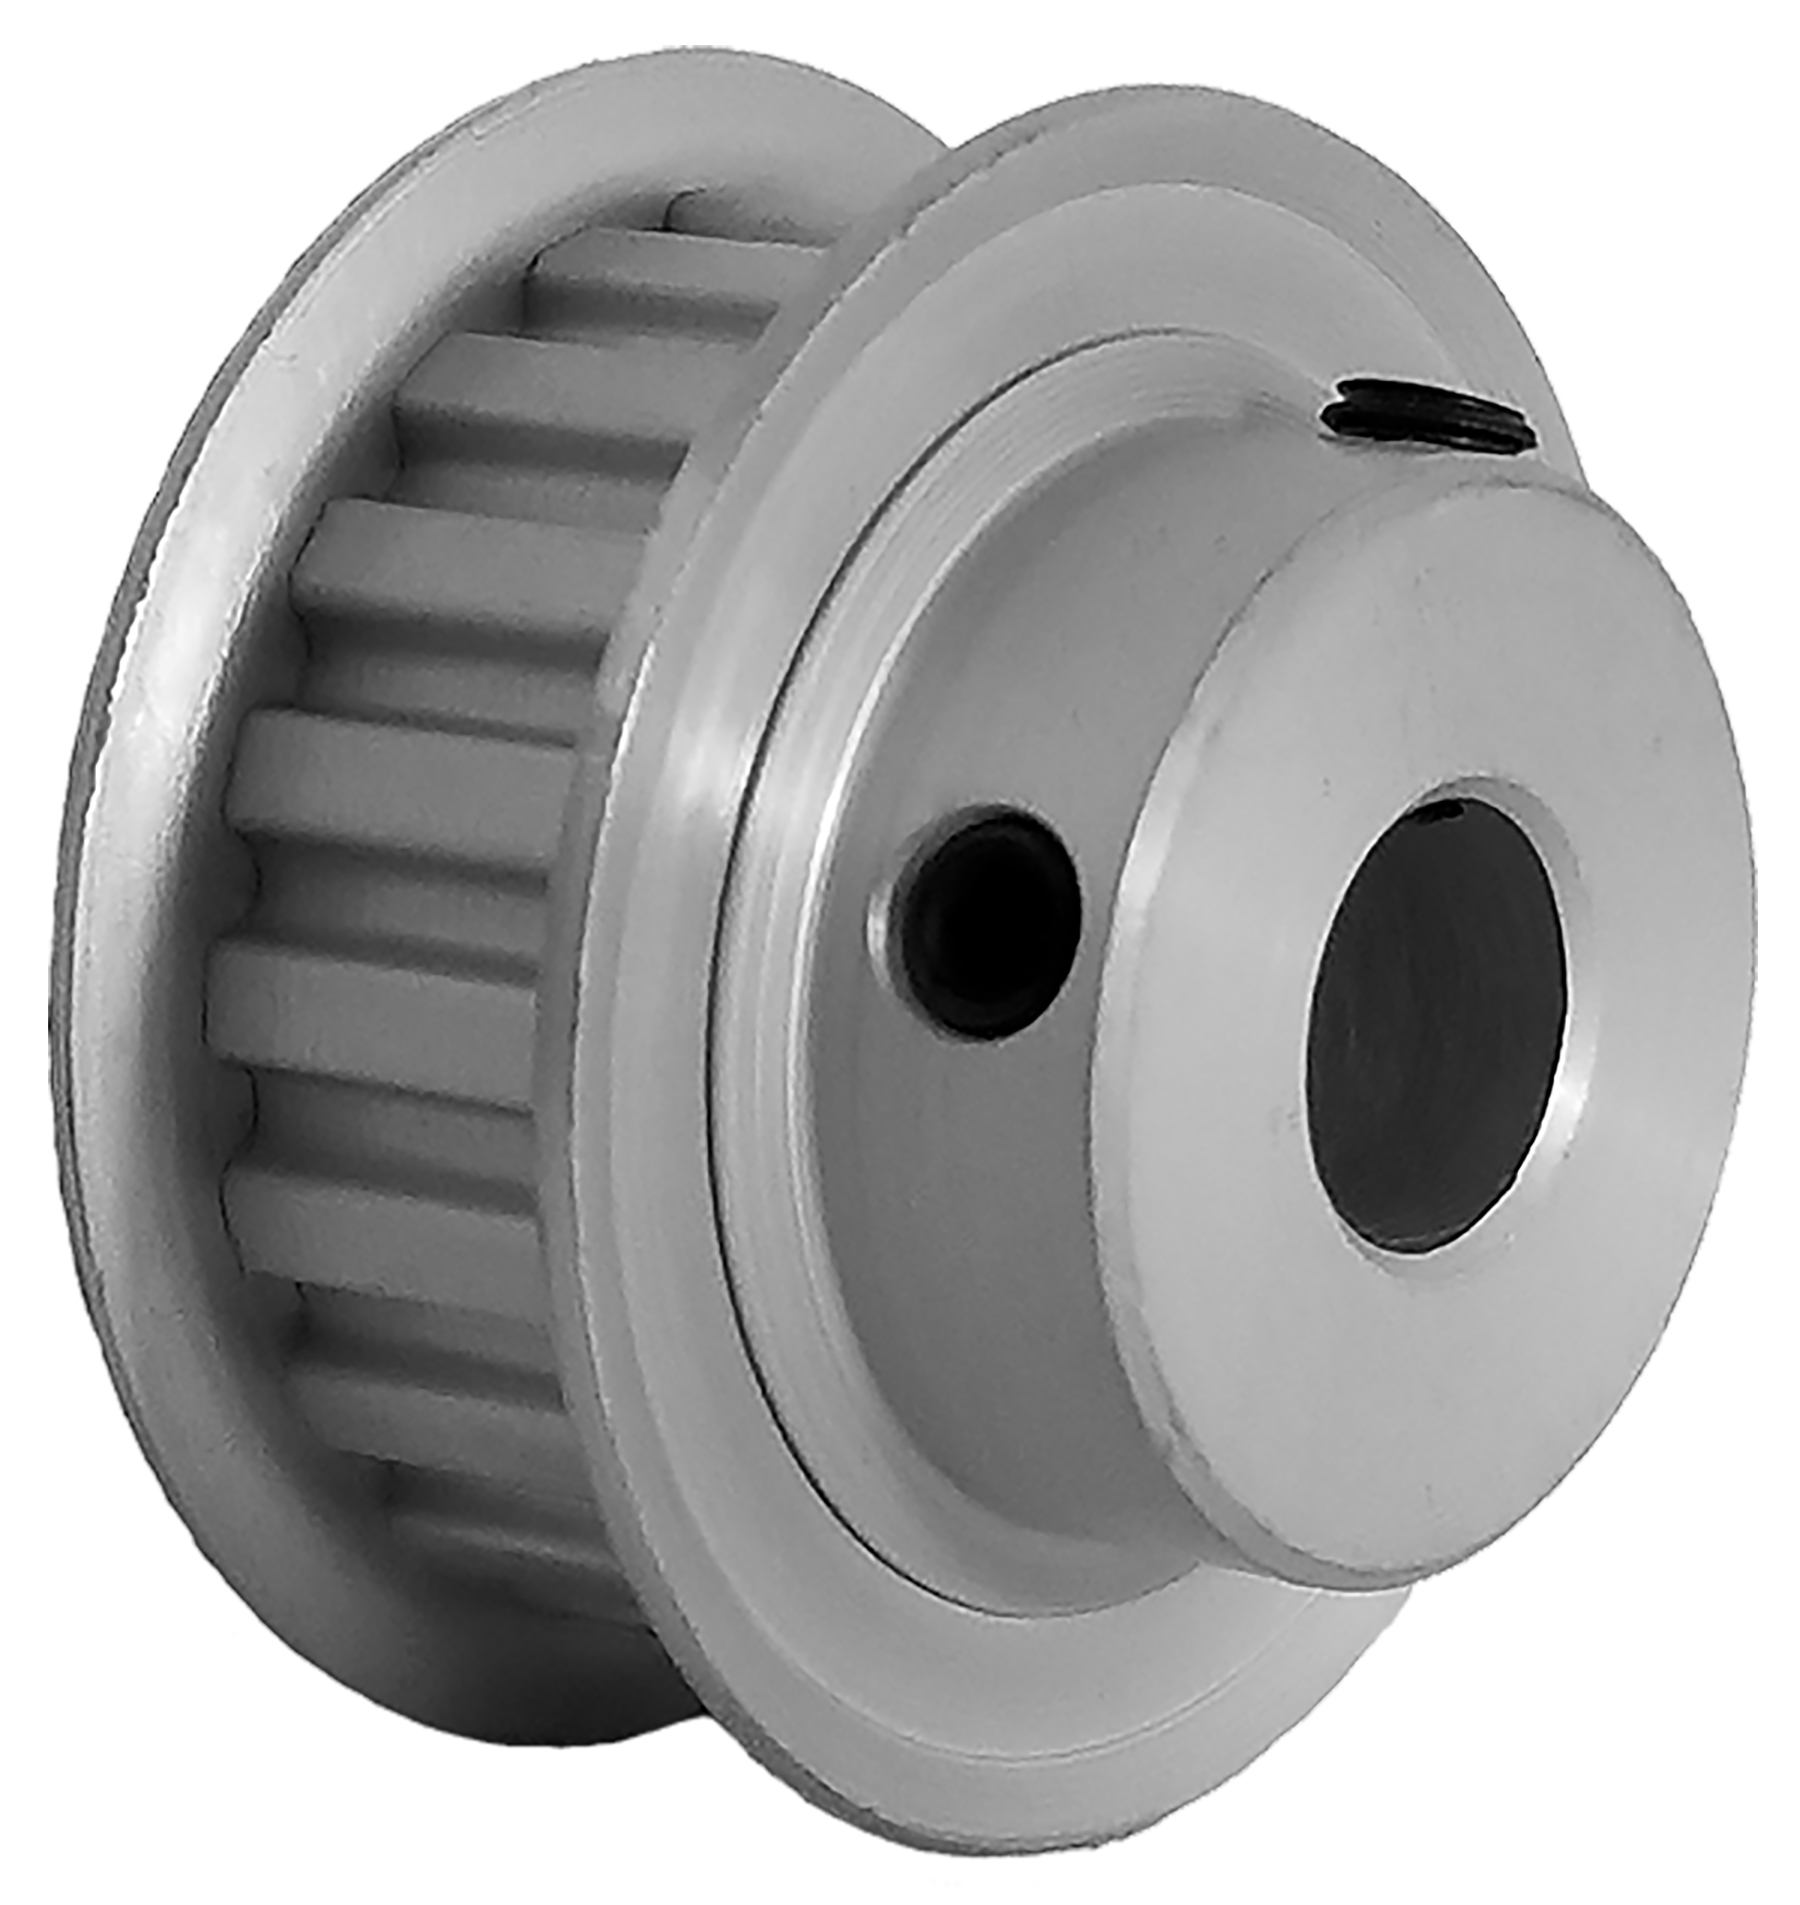 20XL037-6FA5 - Aluminum Imperial Pitch Pulleys